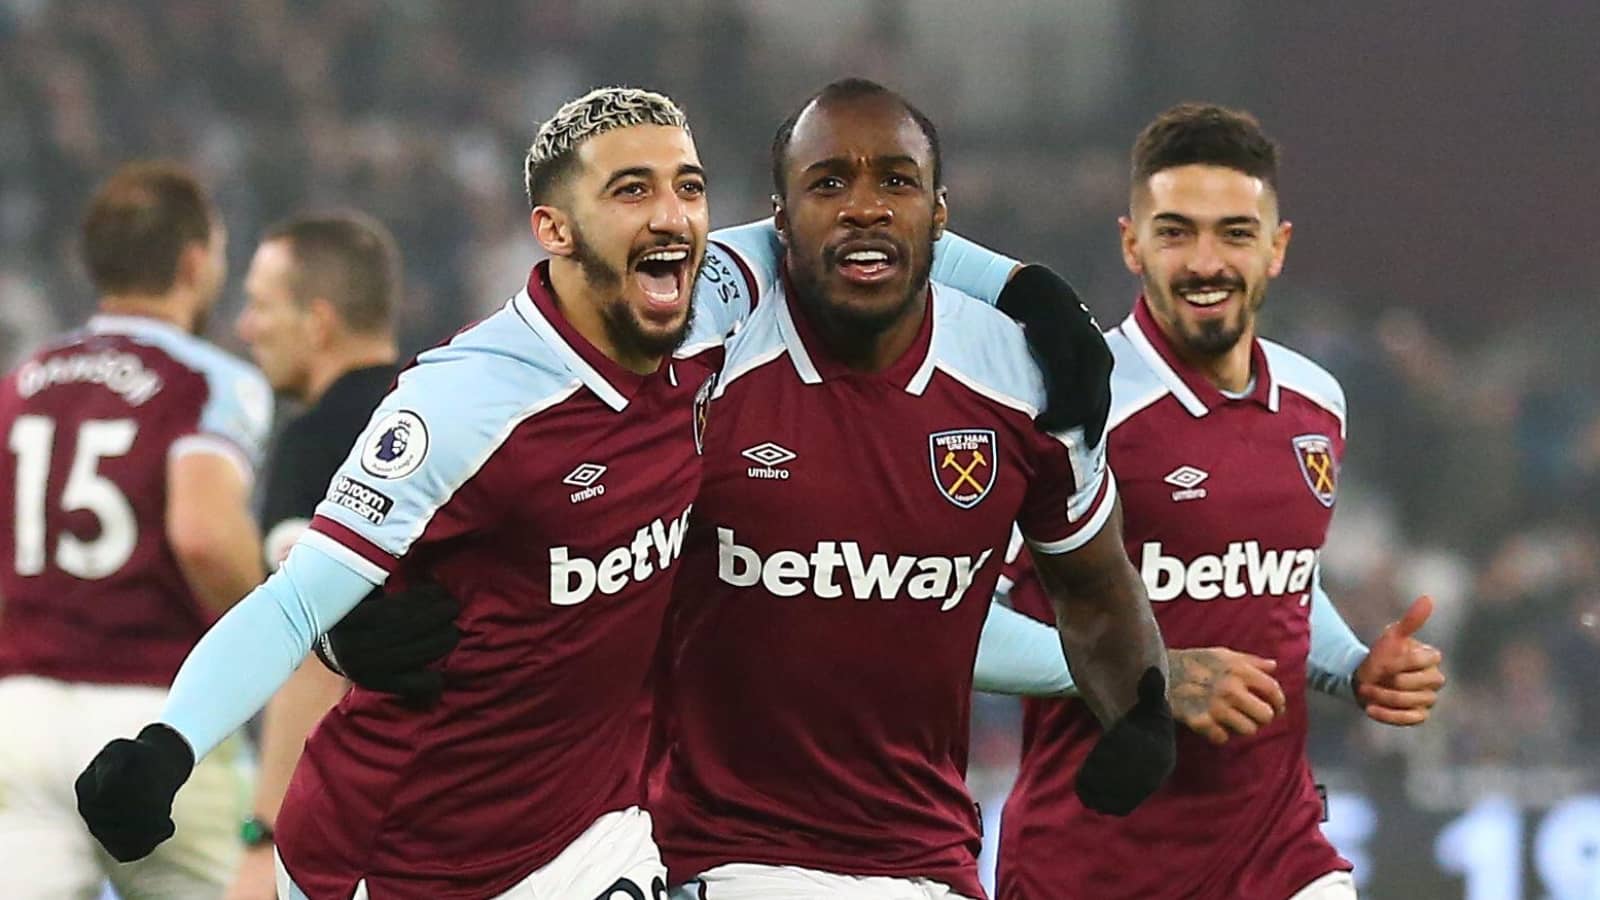 37-time league champions want to sign West Ham ace in June